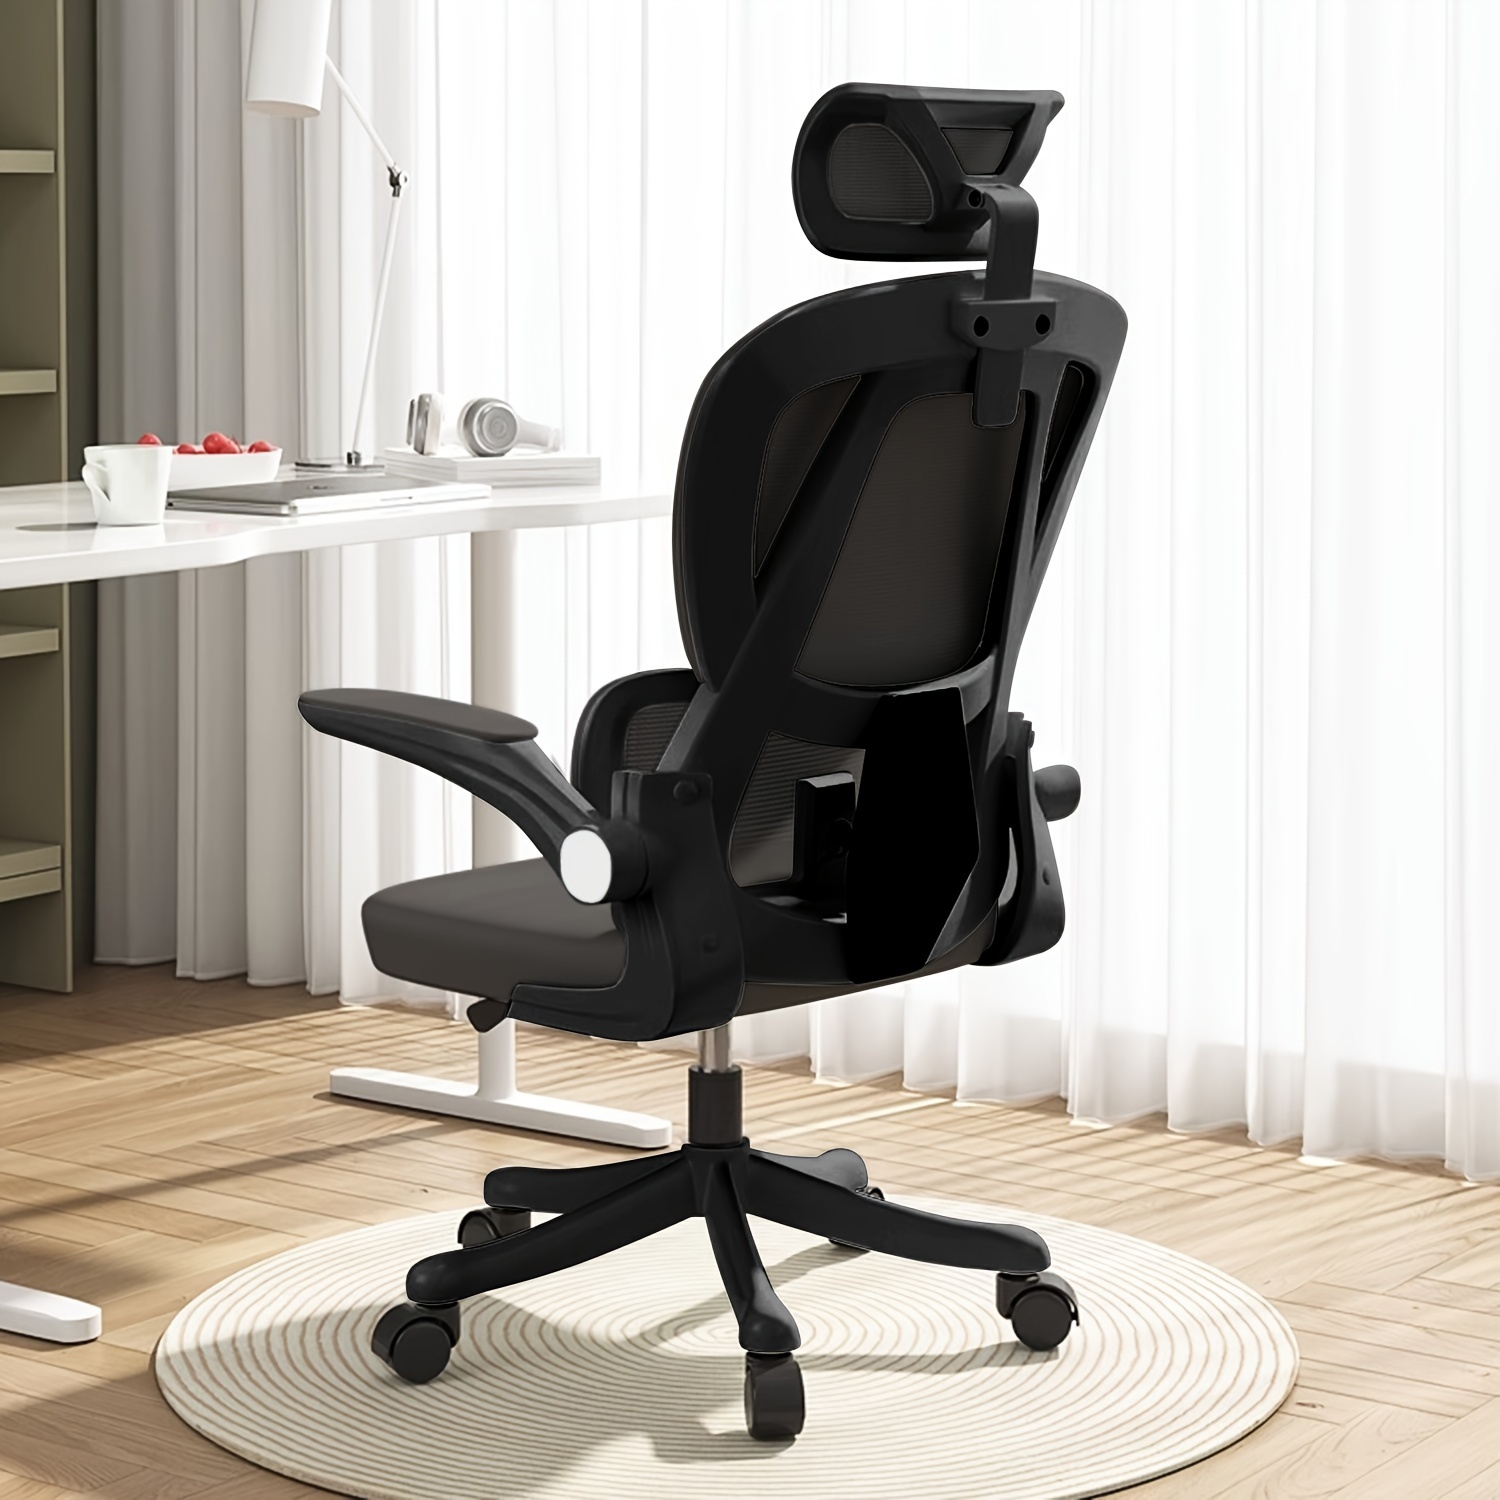 

1pc Ergonomic Office Chair Comfort Home Desk Chair Adjustable High Back Mesh Chair Lumbar Support Computer Chair With Flip-up Arms For Work